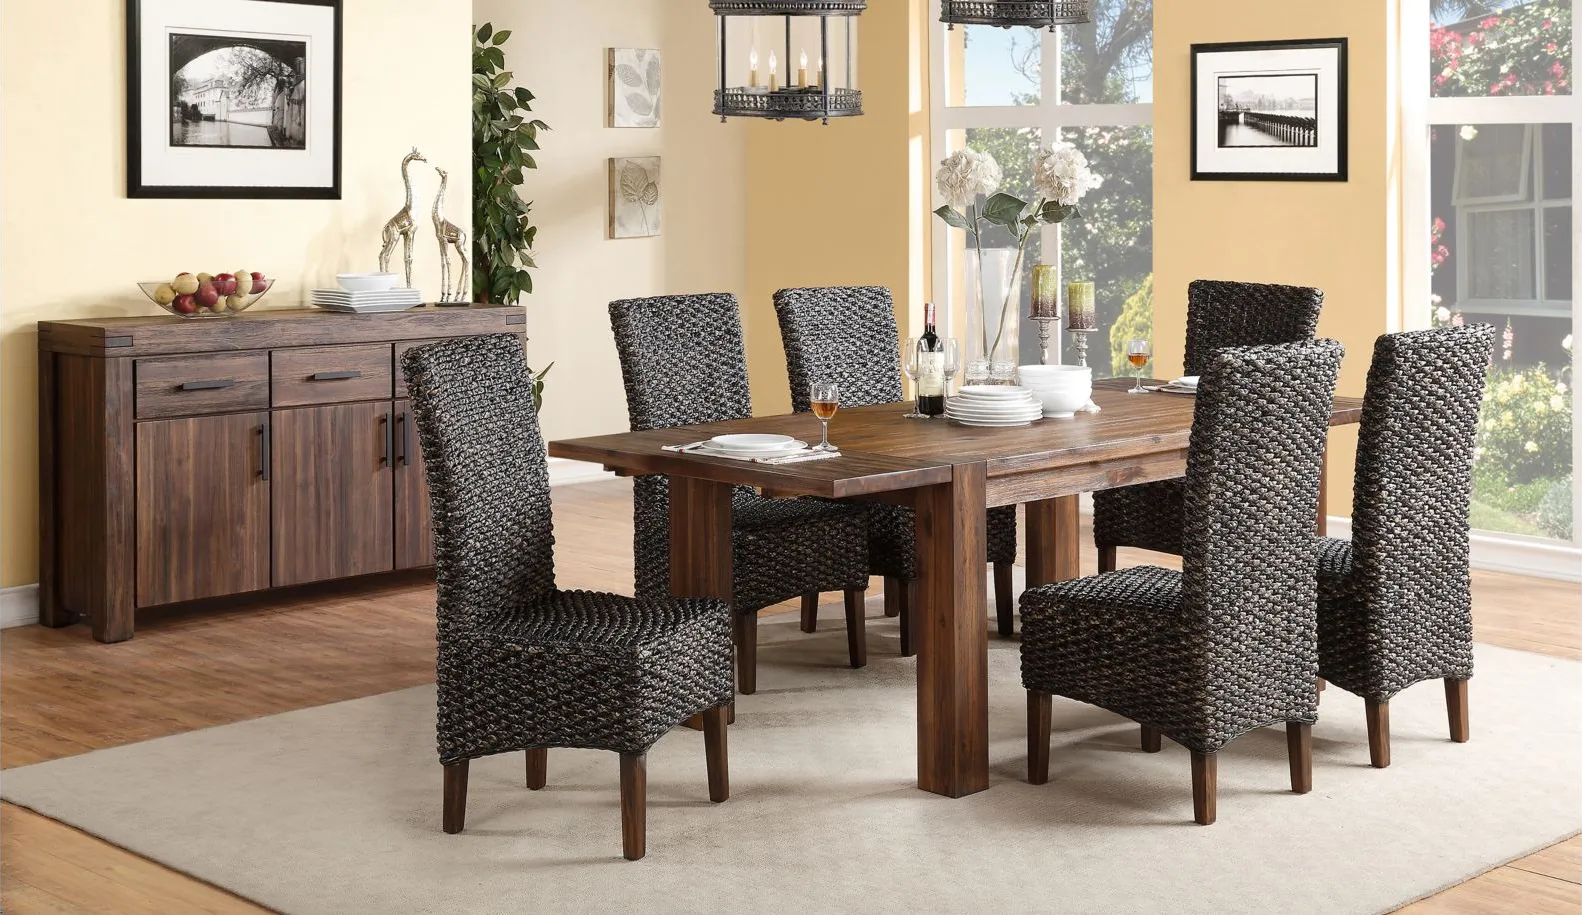 Middlefield 7-pc. Dining Set w/ Woven Chairs in Brick Brown by Bellanest